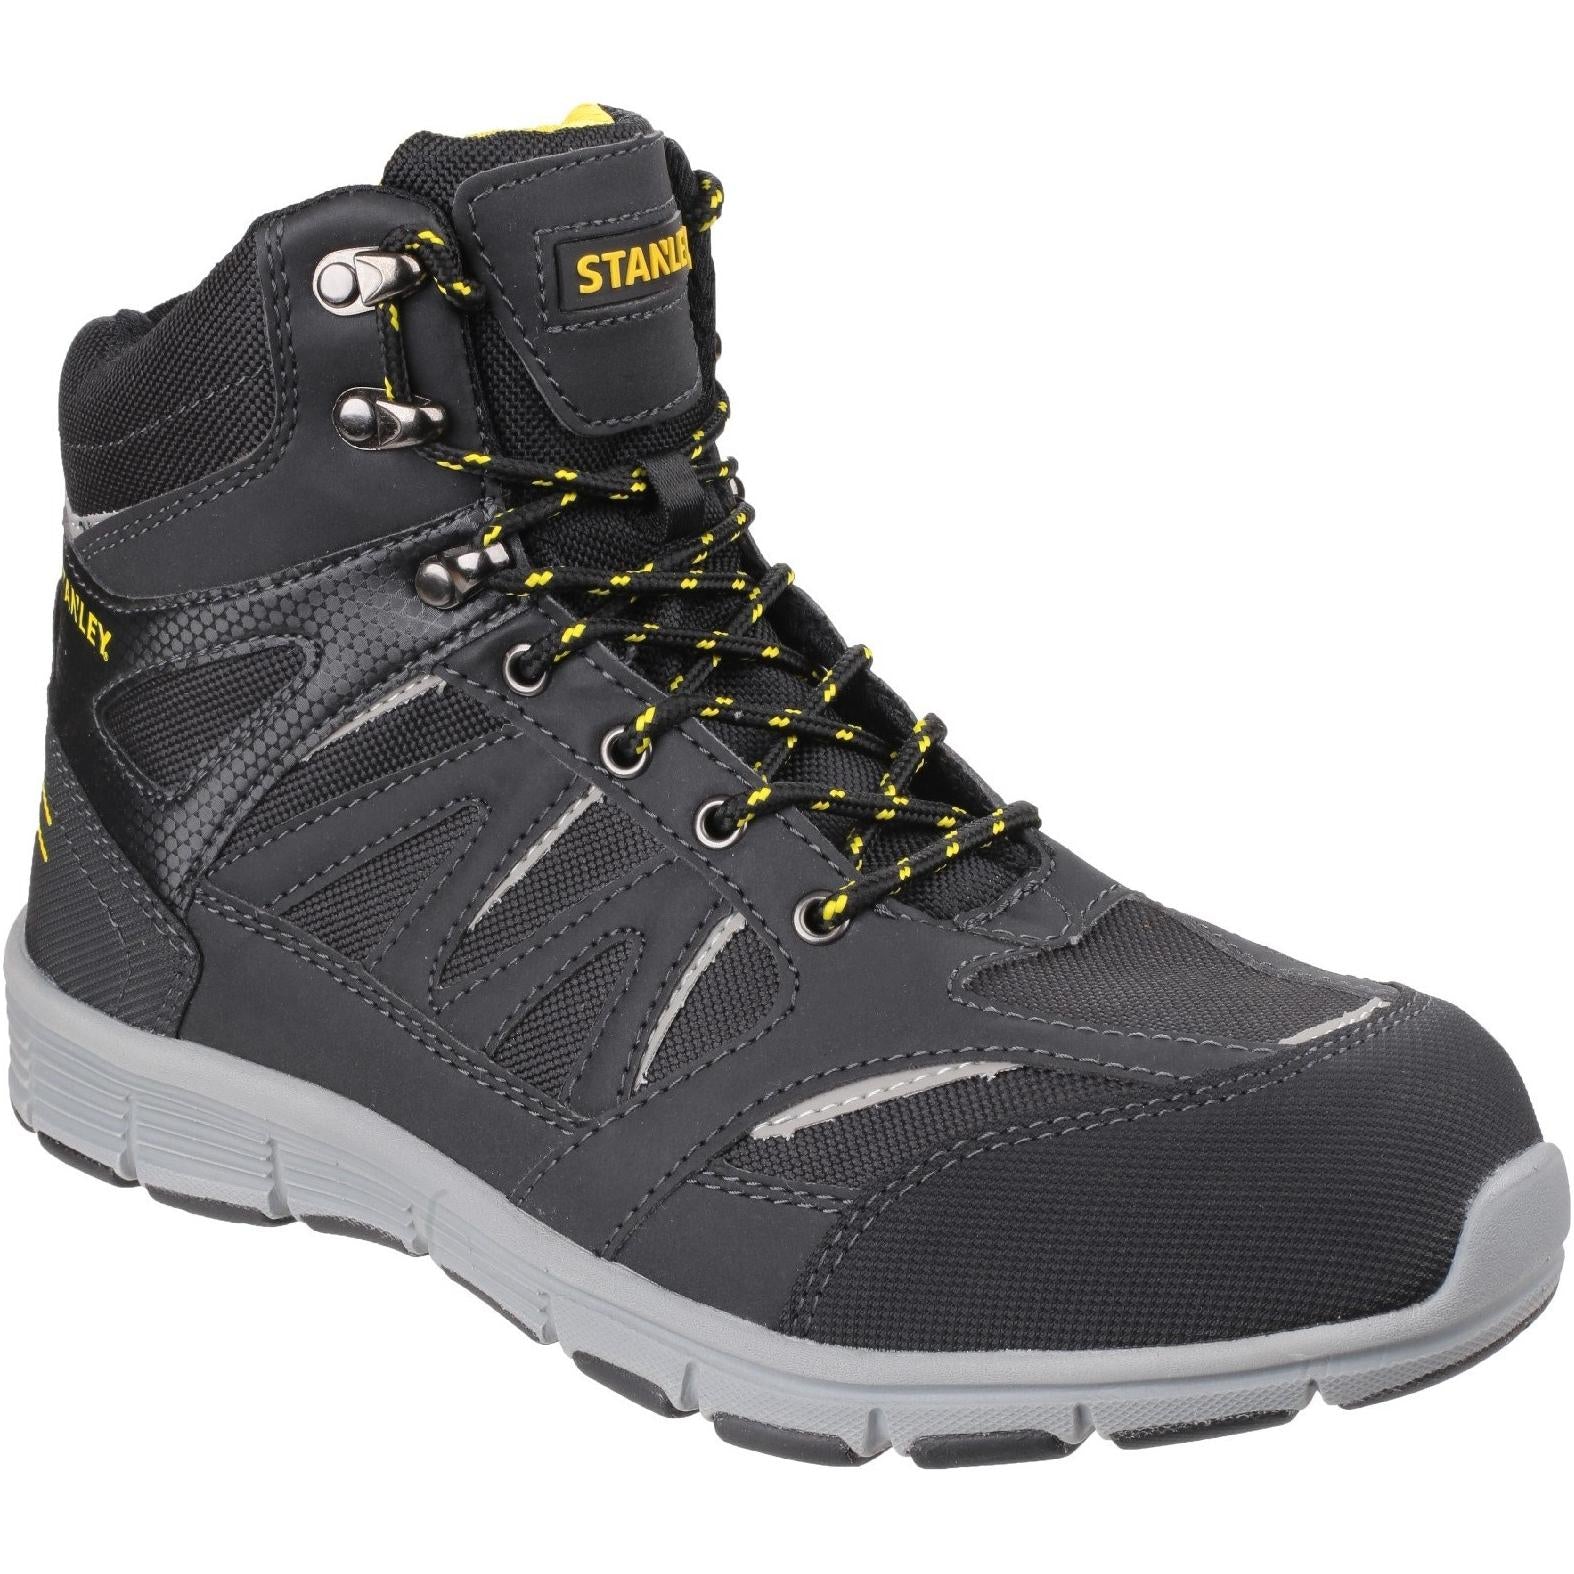 Stanley Pulse Black S1 P Sports Safety Boot